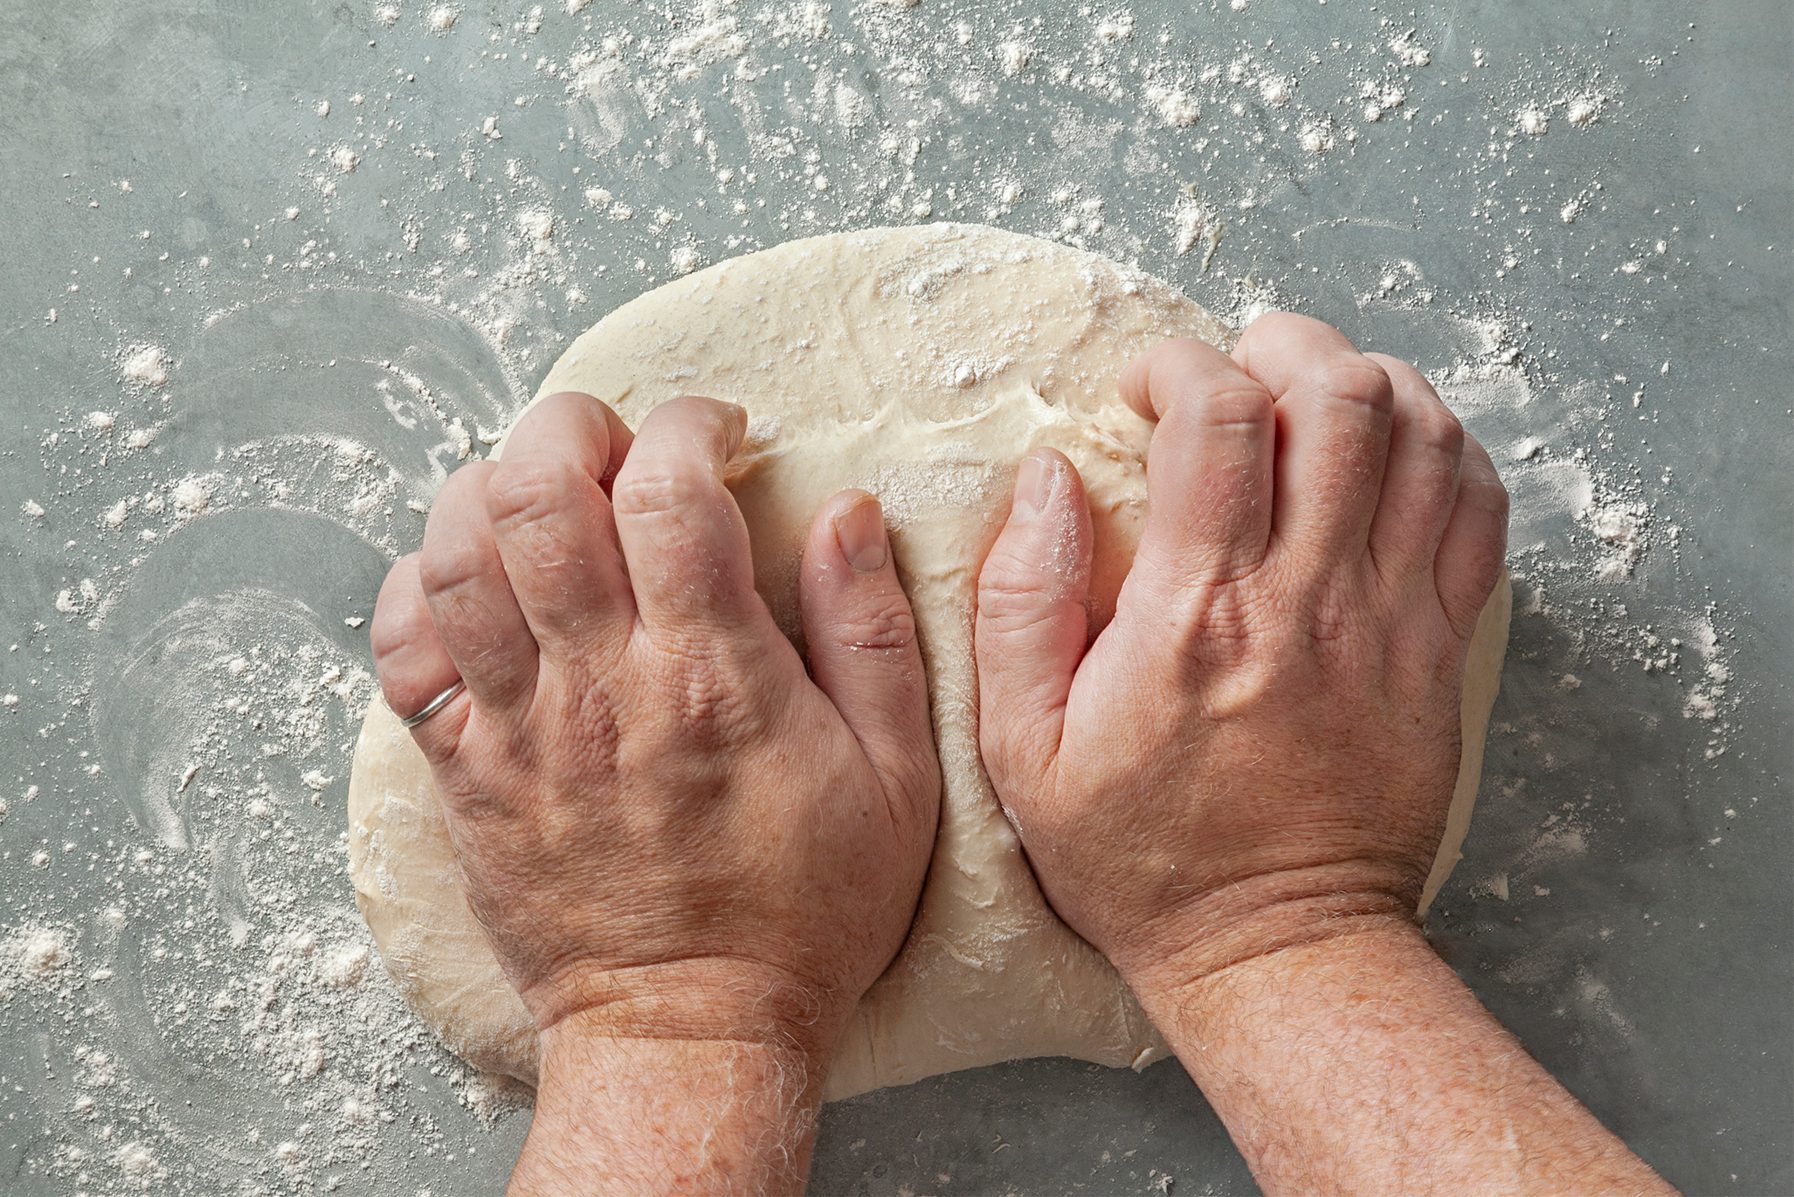 Two hands kneading a ball of dough on a floured surface. Flour is scattered around, indicating the process of preparing the dough. 